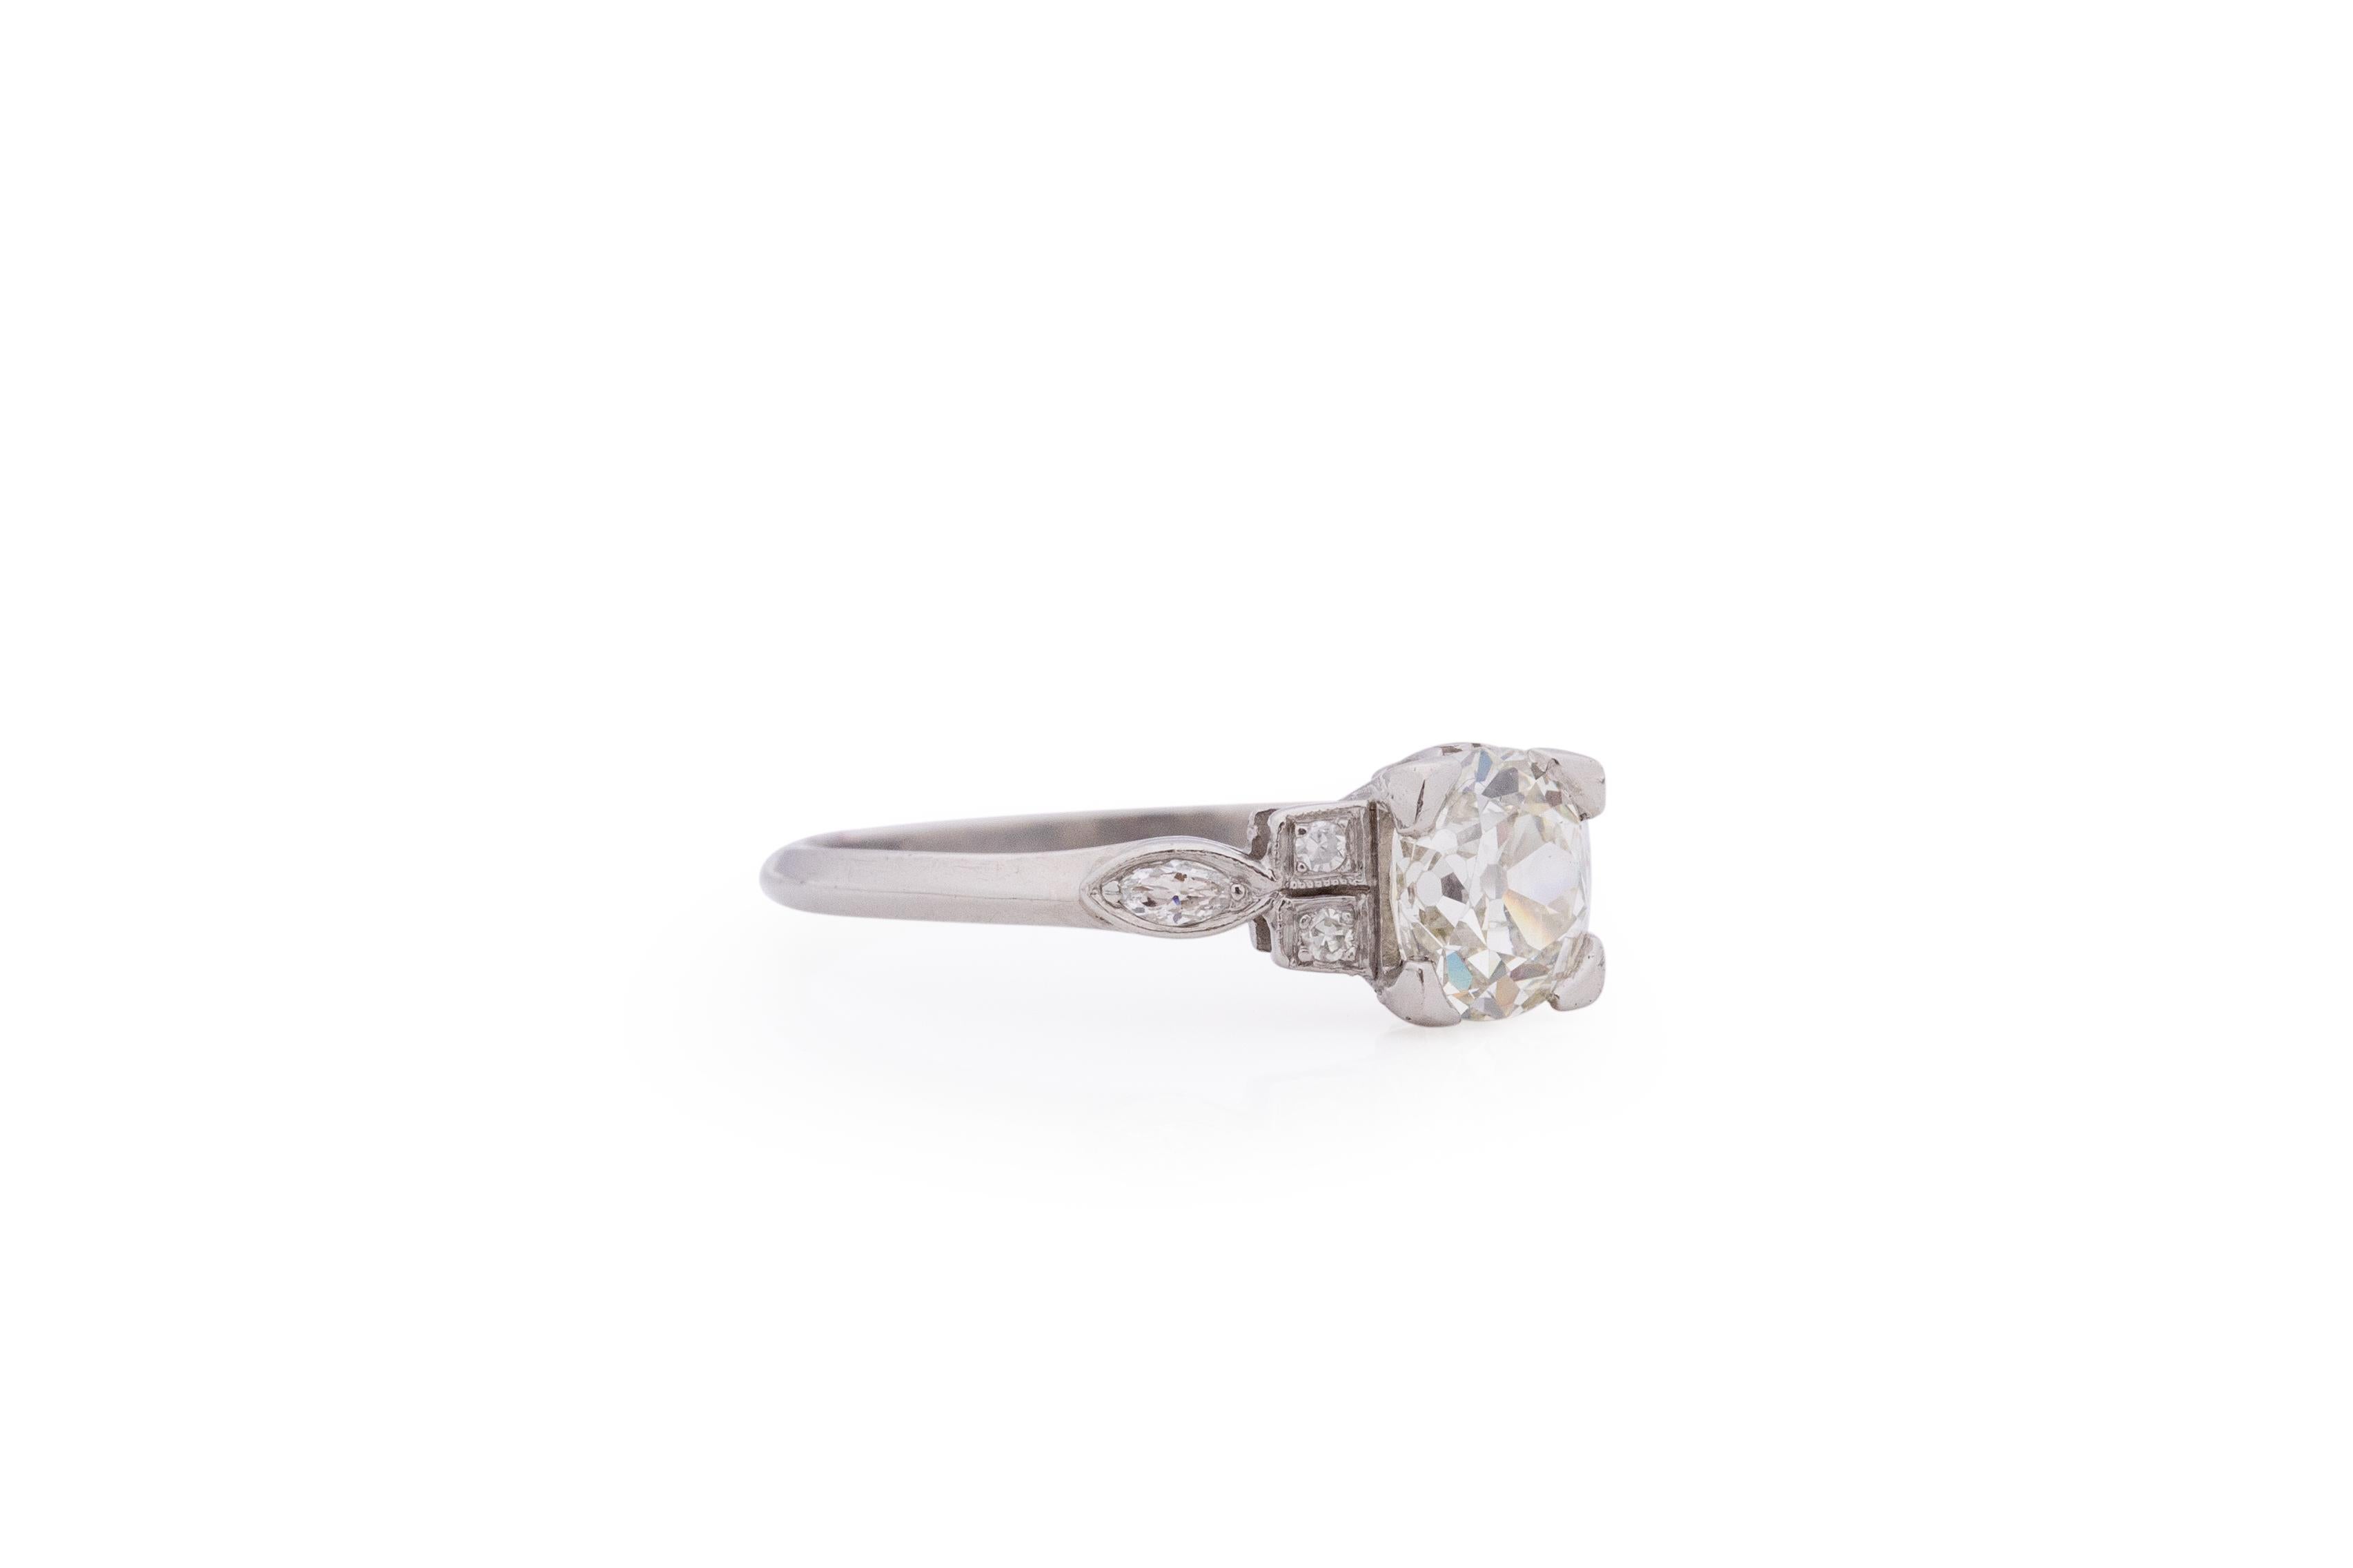 Item Details: 
Ring Size: 6.75
Metal Type: Platinum [Hallmarked, and Tested]
Weight: 1.8 grams

Center Diamond Details:
GIA REPORT #: 2215413712
Weight: 1.00 carat
Cut: Antique Cushion (Old Mine Brilliant)
Color: K
Clarity: SI2
Measurements: 6.39 x